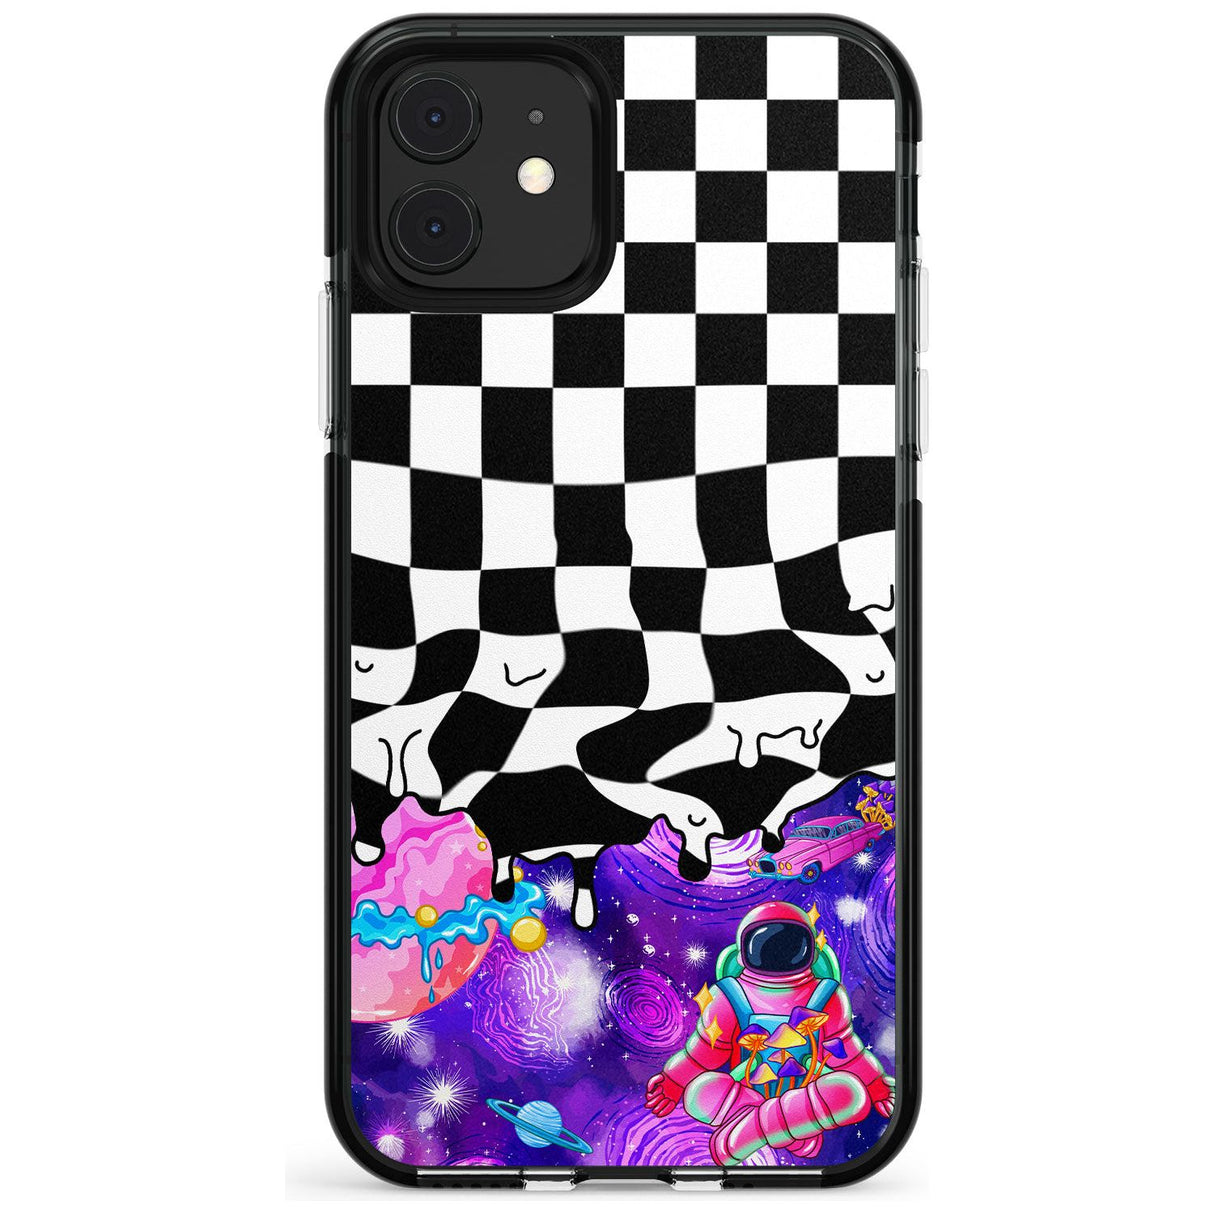 Washed Out Black Impact Phone Case for iPhone 11 Pro Max